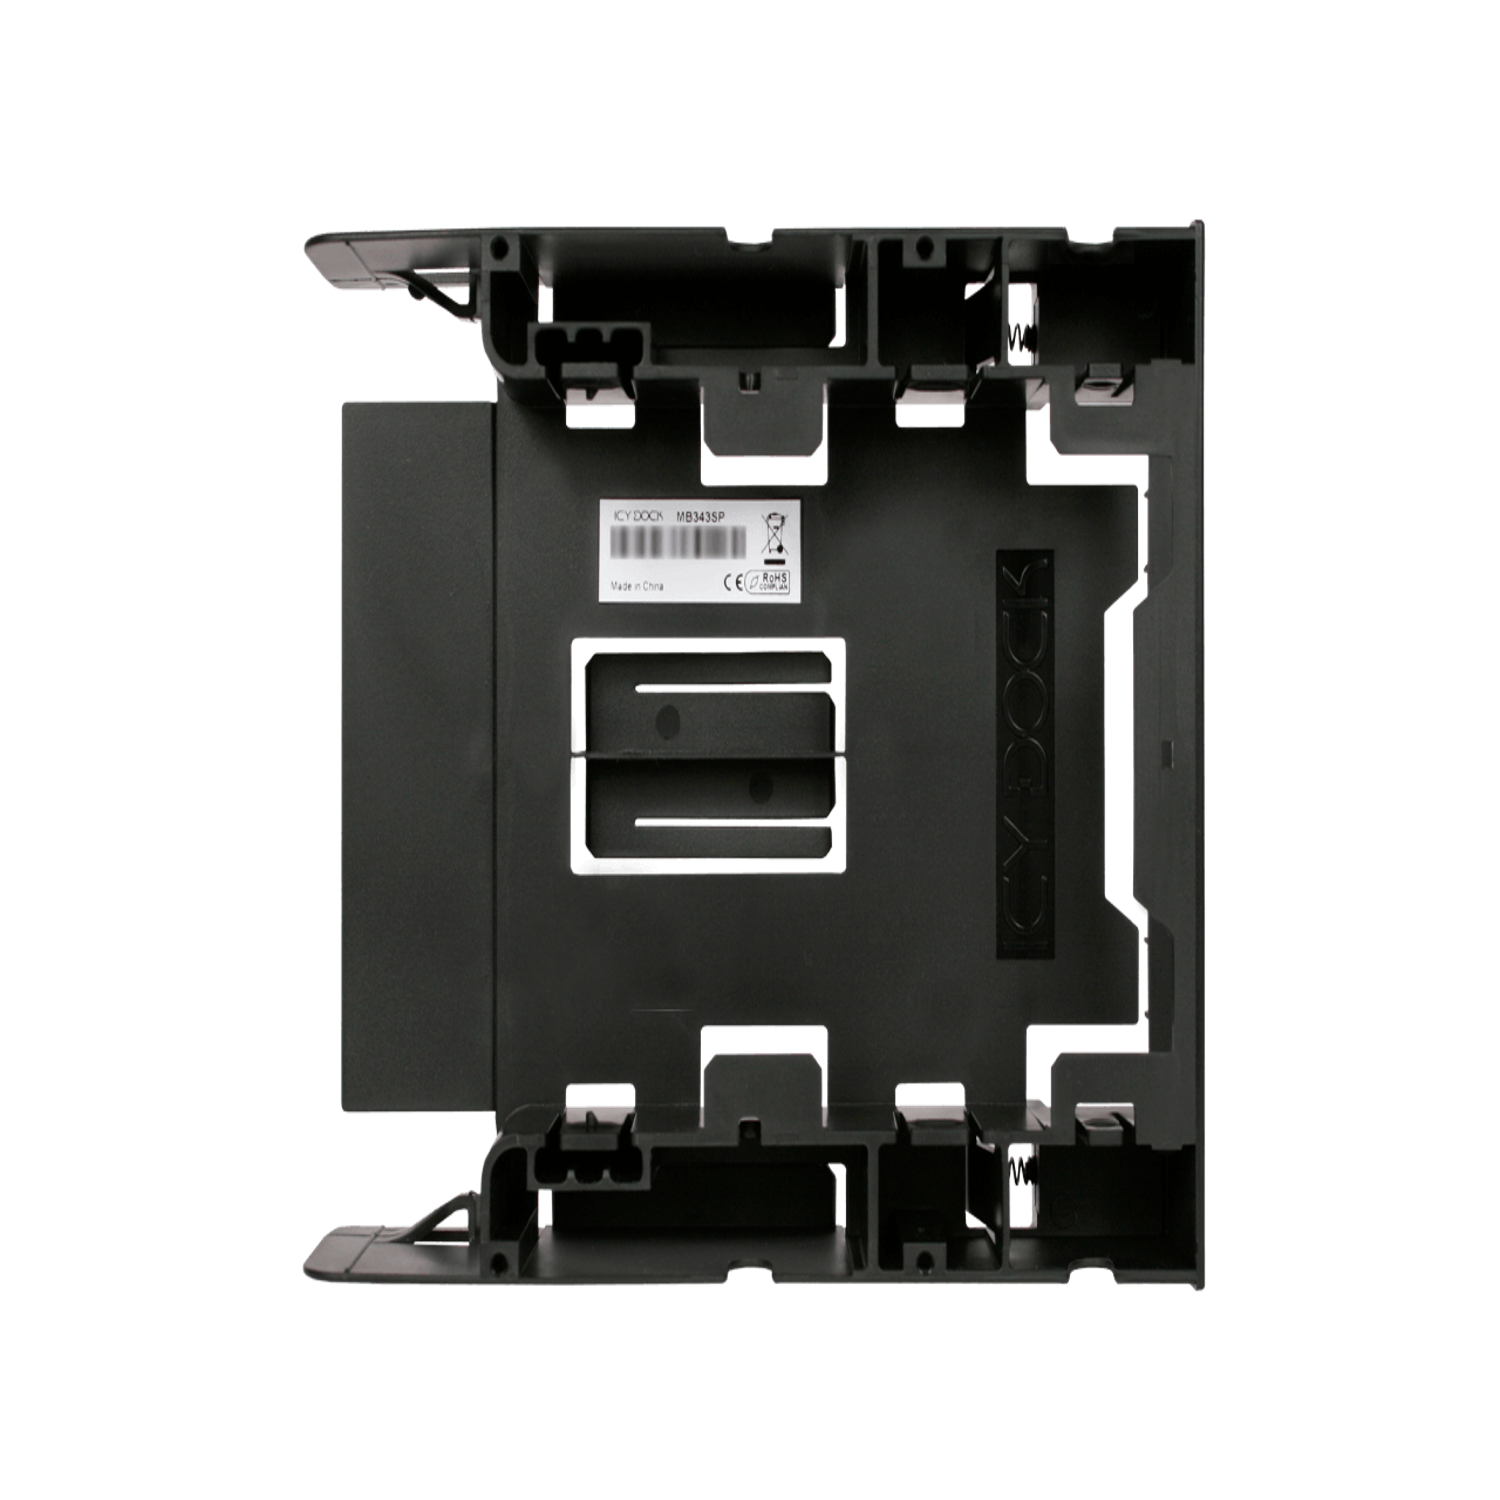 Dual 2.5" HDD/SSD & One 3.5" HDD/Device Front Bay to External 5.25" Bay Converter/ Mounting Kit